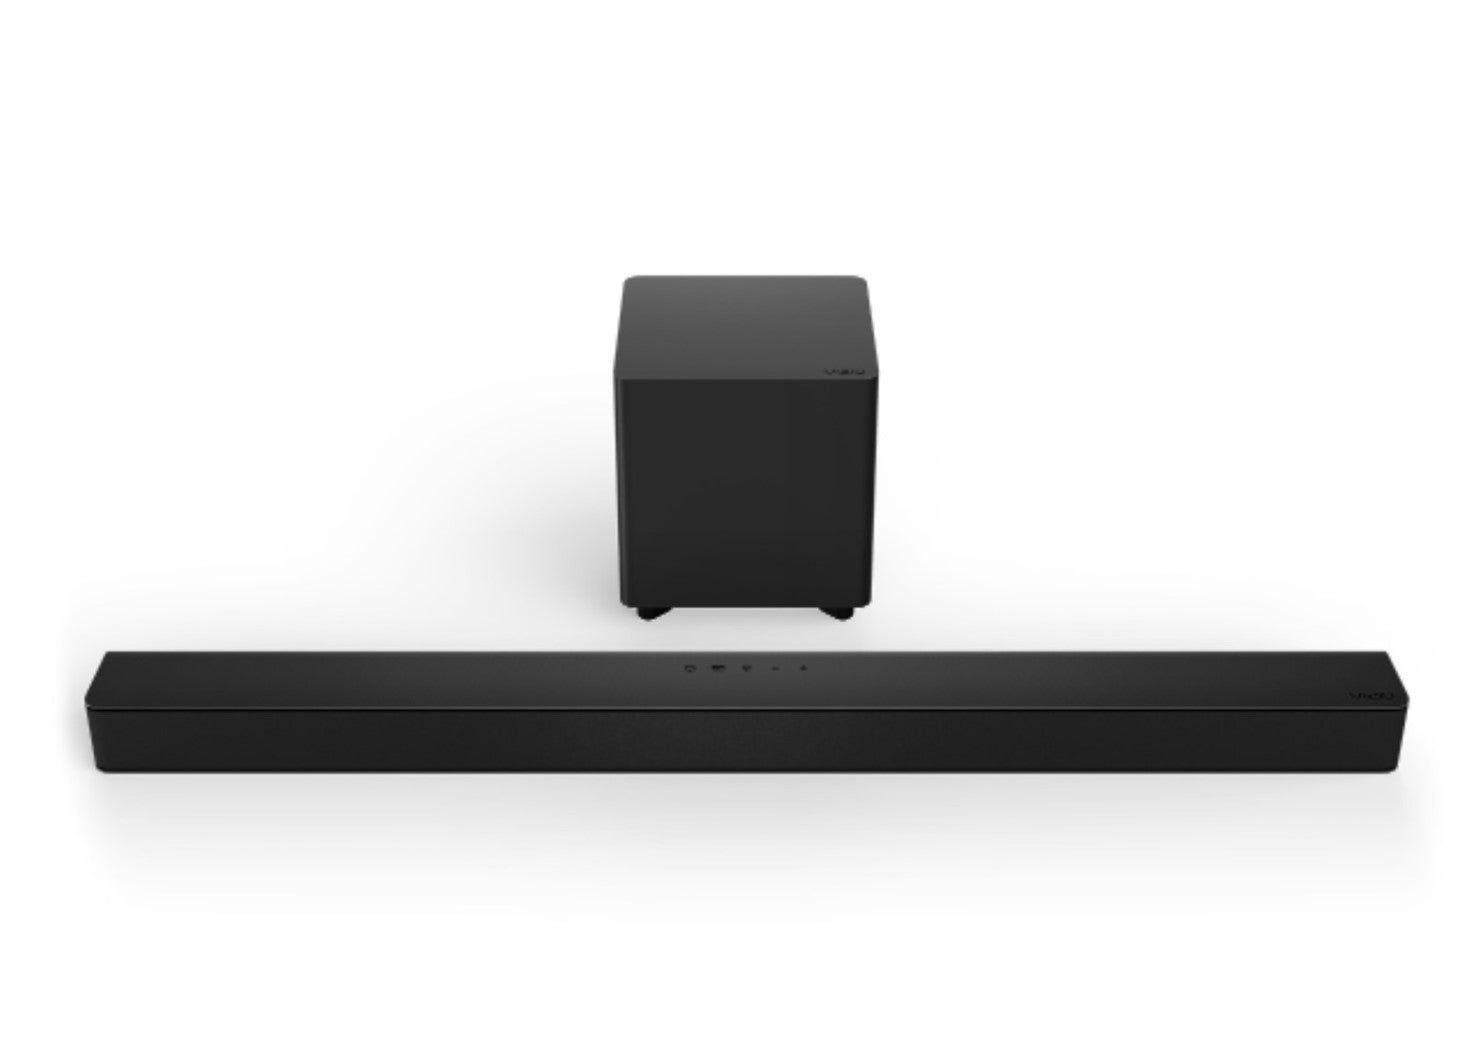 Vizio V21x-J8B-RB V-Series 2.1 Home Theater Sound Bar System with 4.5" Wireless Subwoofer - Certified Refurbished